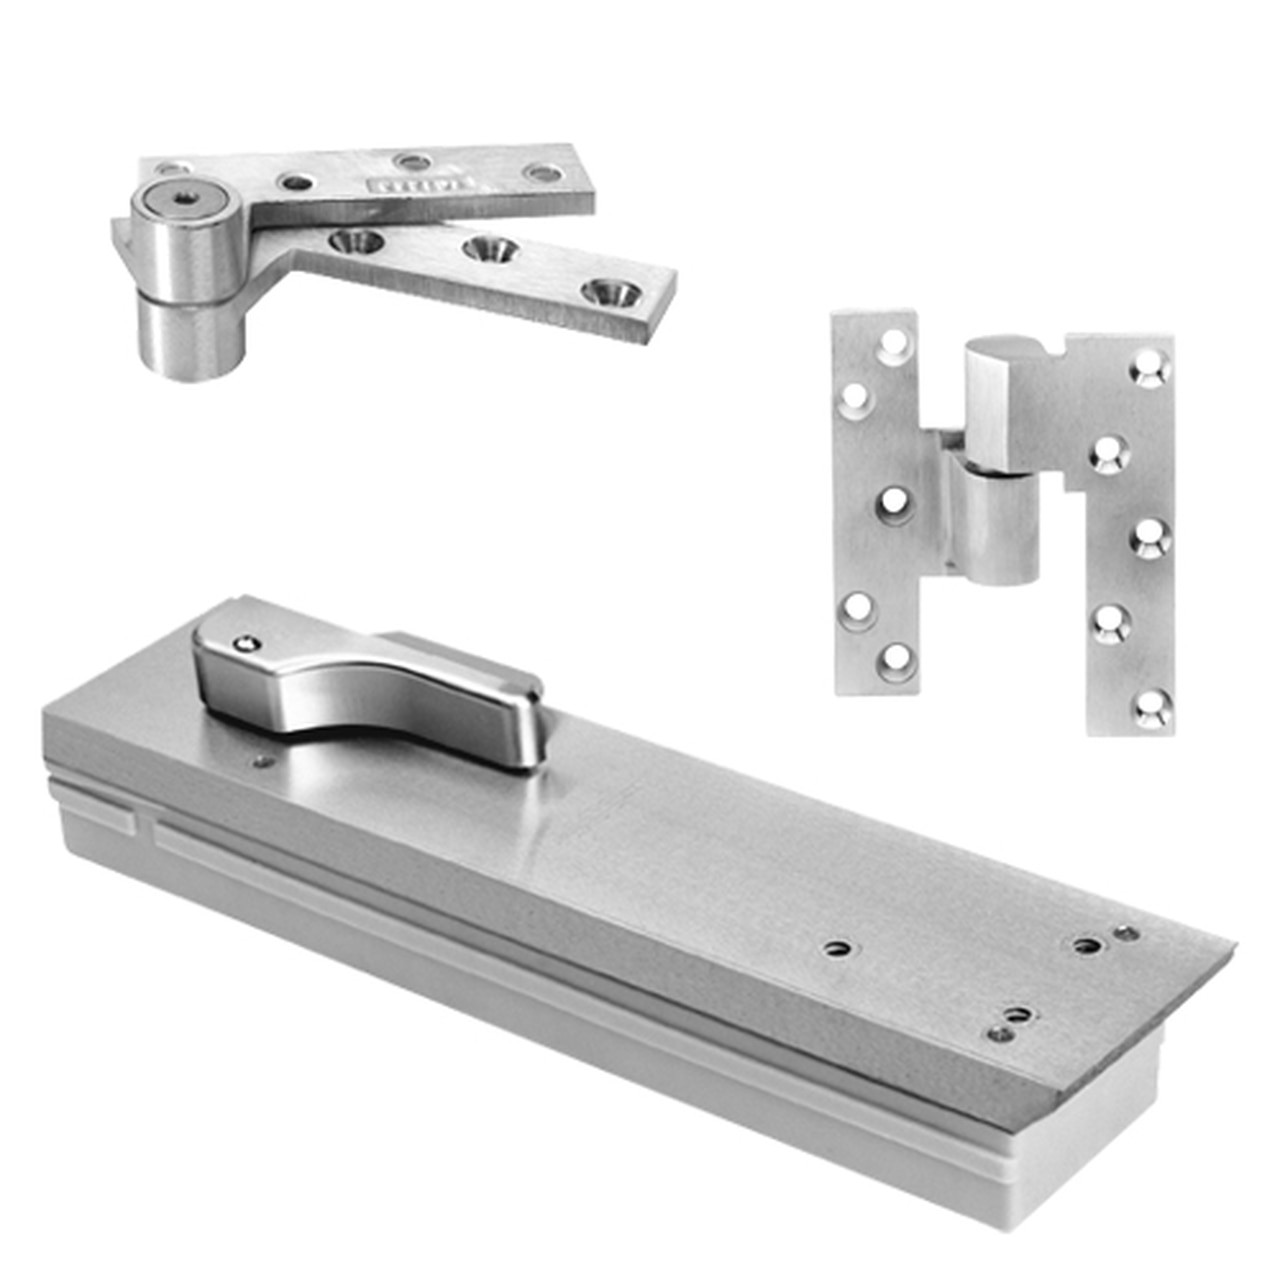 FQ5104NBC-LCC-RH-625 Rixson Q51 Series Fire Rated 3/4" Offset Hung Shallow Depth Floor Closers in Bright Chrome Finish